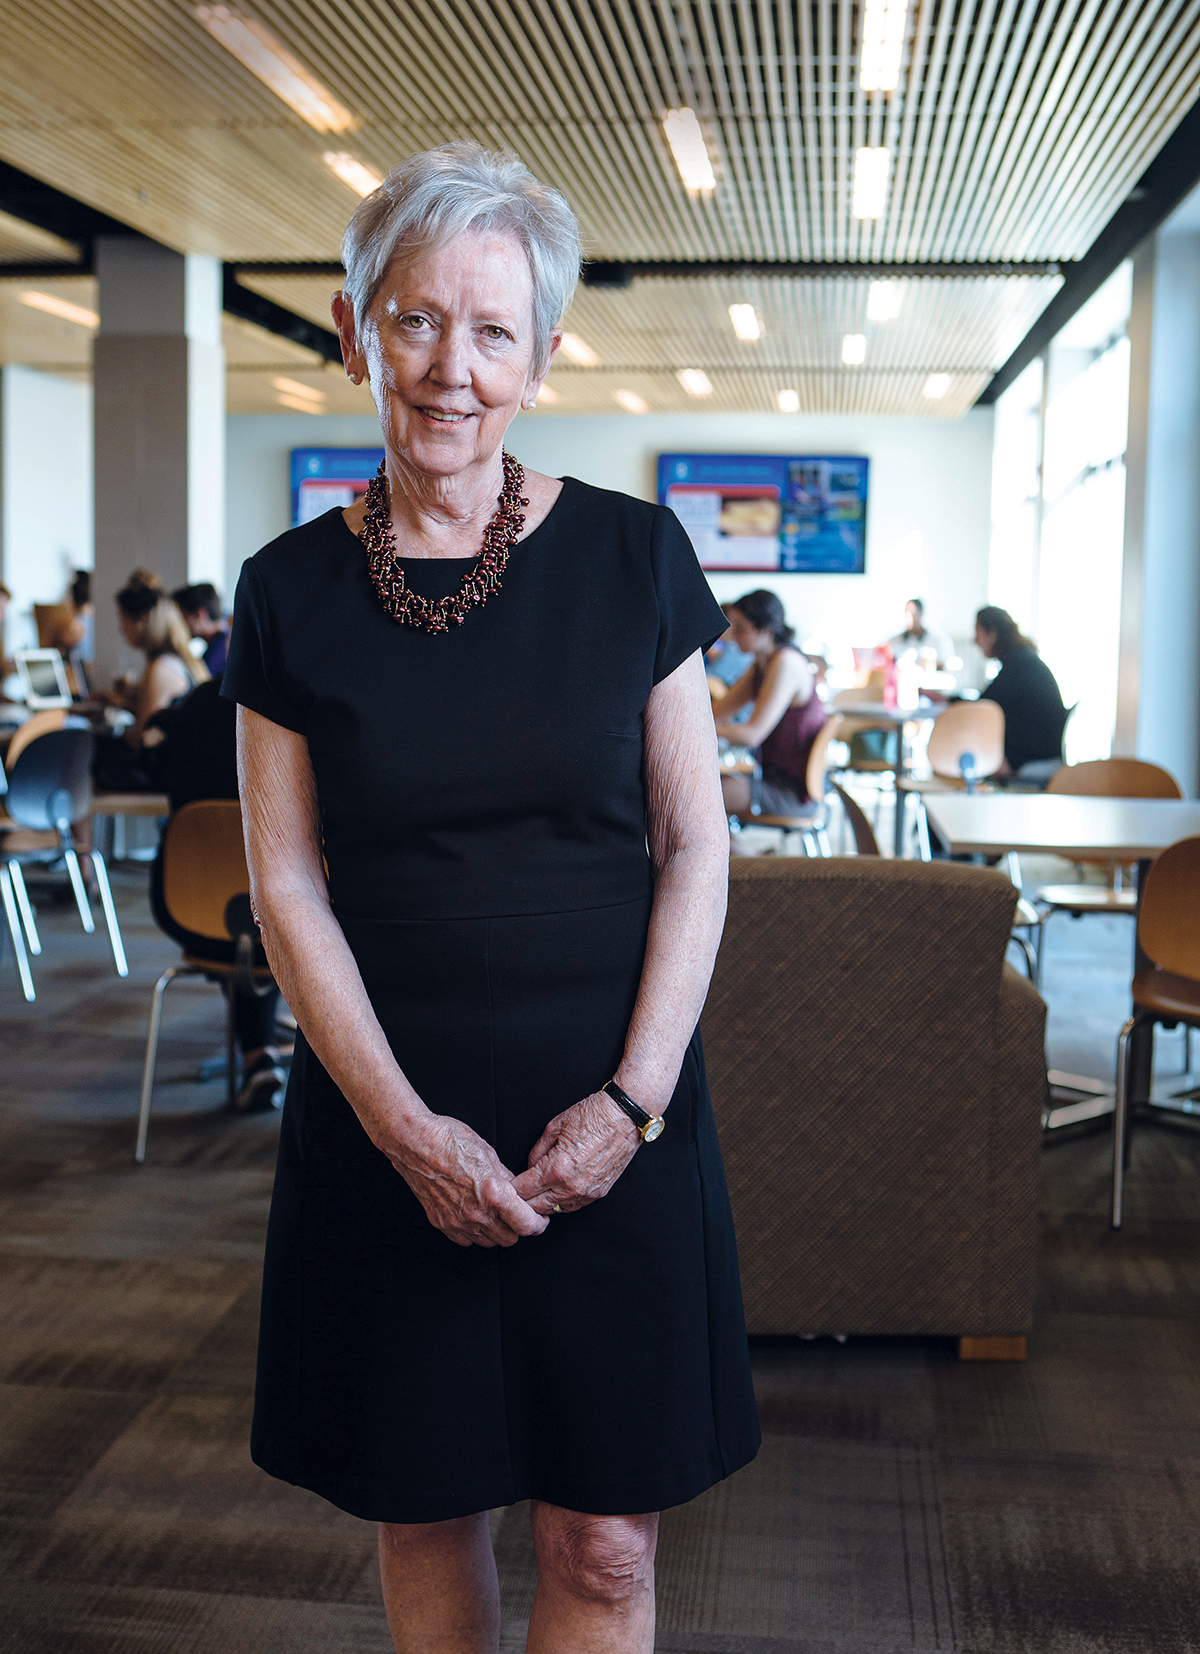 A religious Sister of Mercy, Sister Jane Gerety is now in her ninth year as the head of Salve Regina University, having served as a member of Salve’s board of trustees since 1995, as well as in a number of academic and health care industry positions. / PBN PHOTO/RUPERT WHITELEY